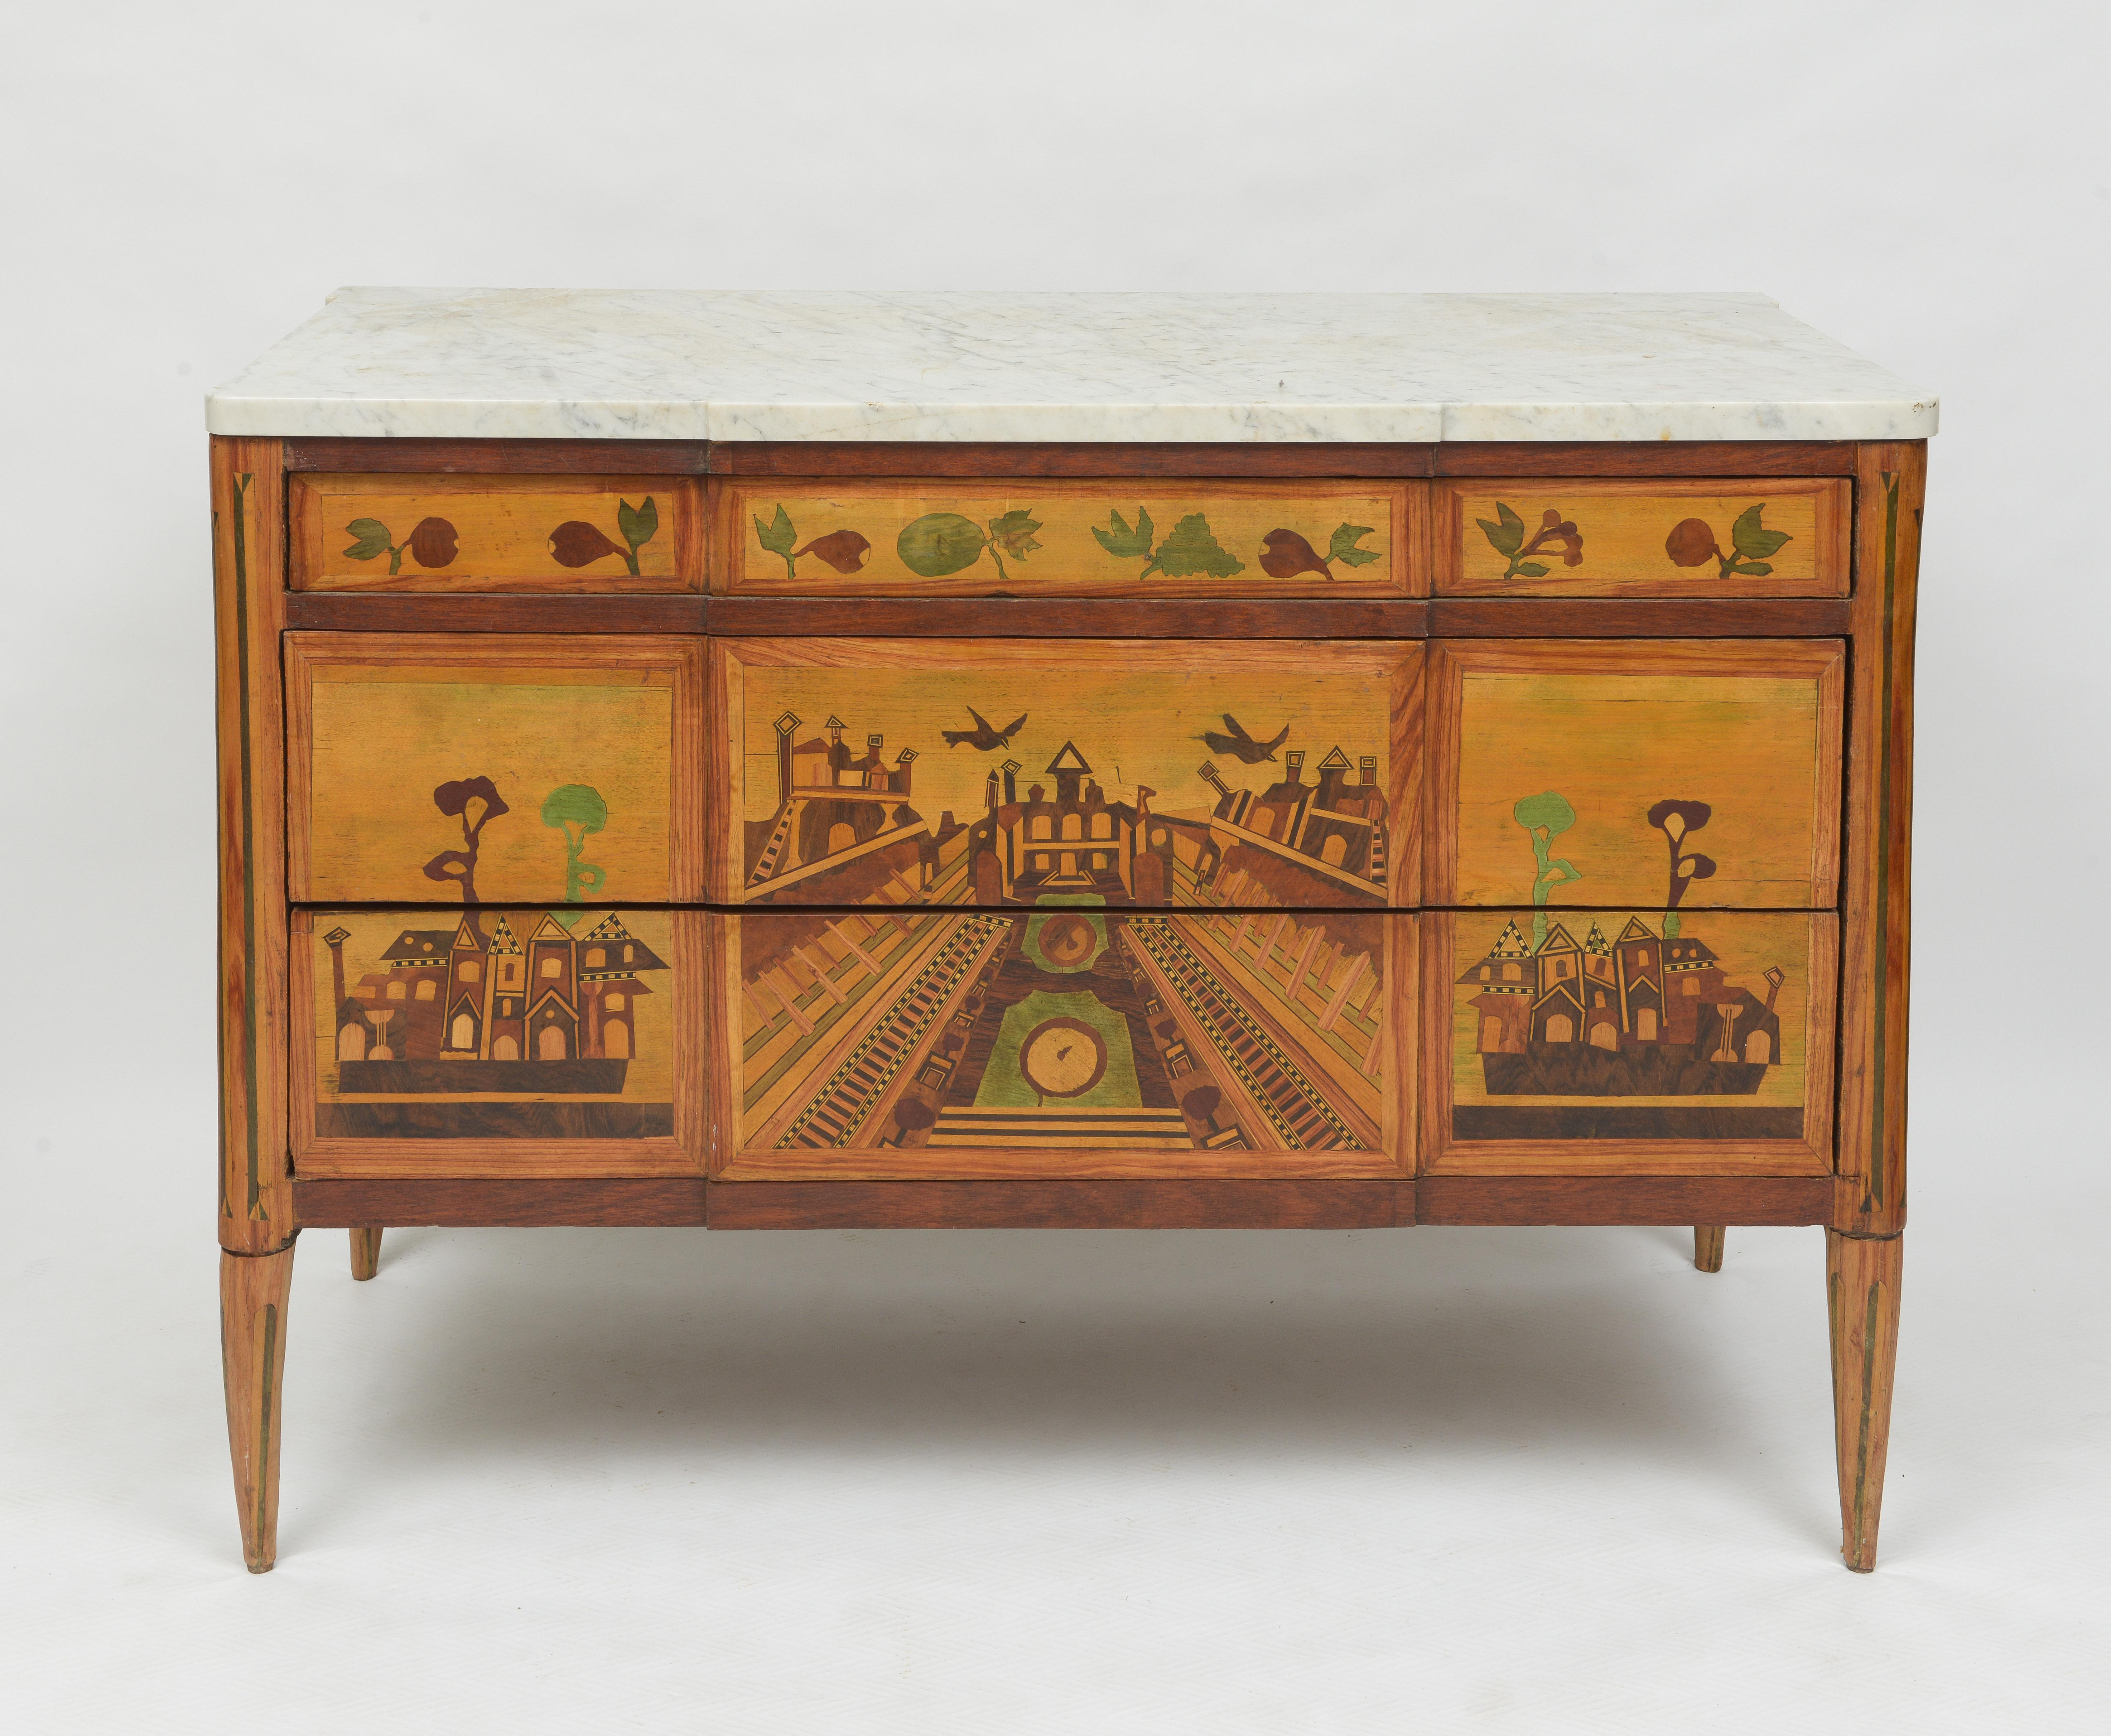 Extremely unusual three drawer French chest
Beautifully drawn inlays of figs, grapes and pottery
Design has a surrealistic feel to it
Obviously and artist depiction of a town
Finished with a marble top and supported by inlayed turned legs